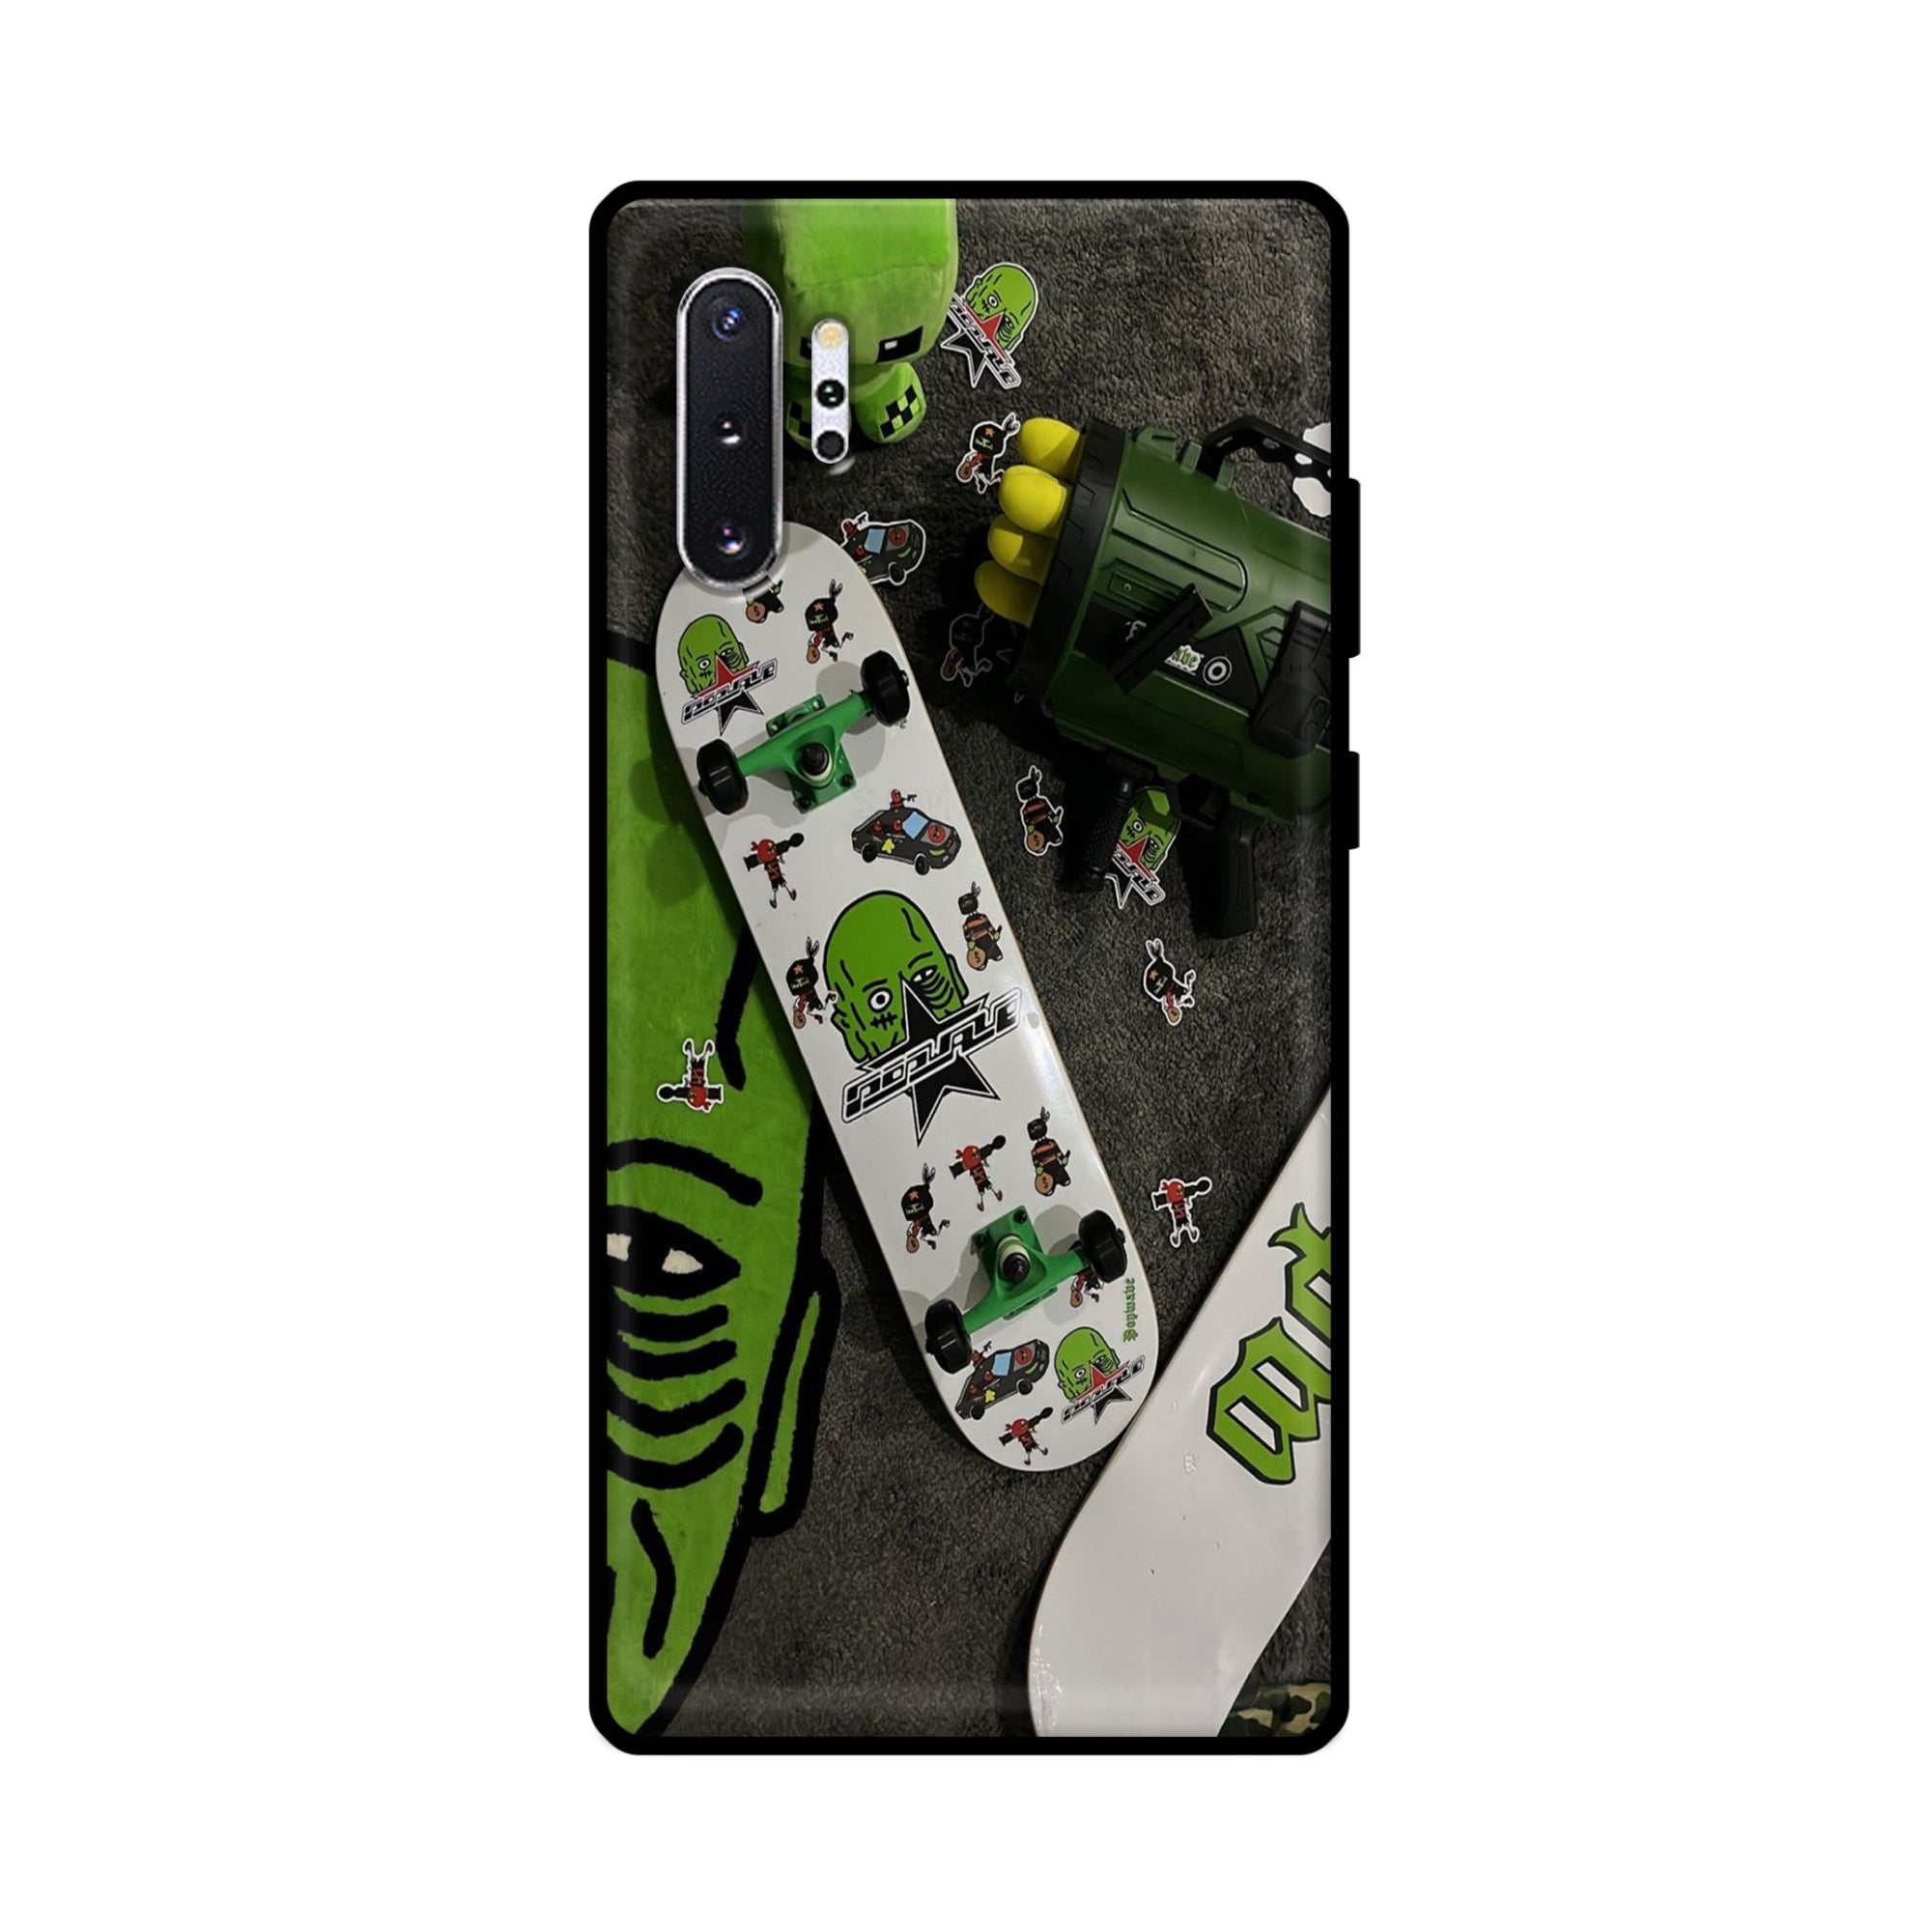 Buy Hulk Skateboard Metal-Silicon Back Mobile Phone Case/Cover For Samsung Note 10 Plus (5G) Online